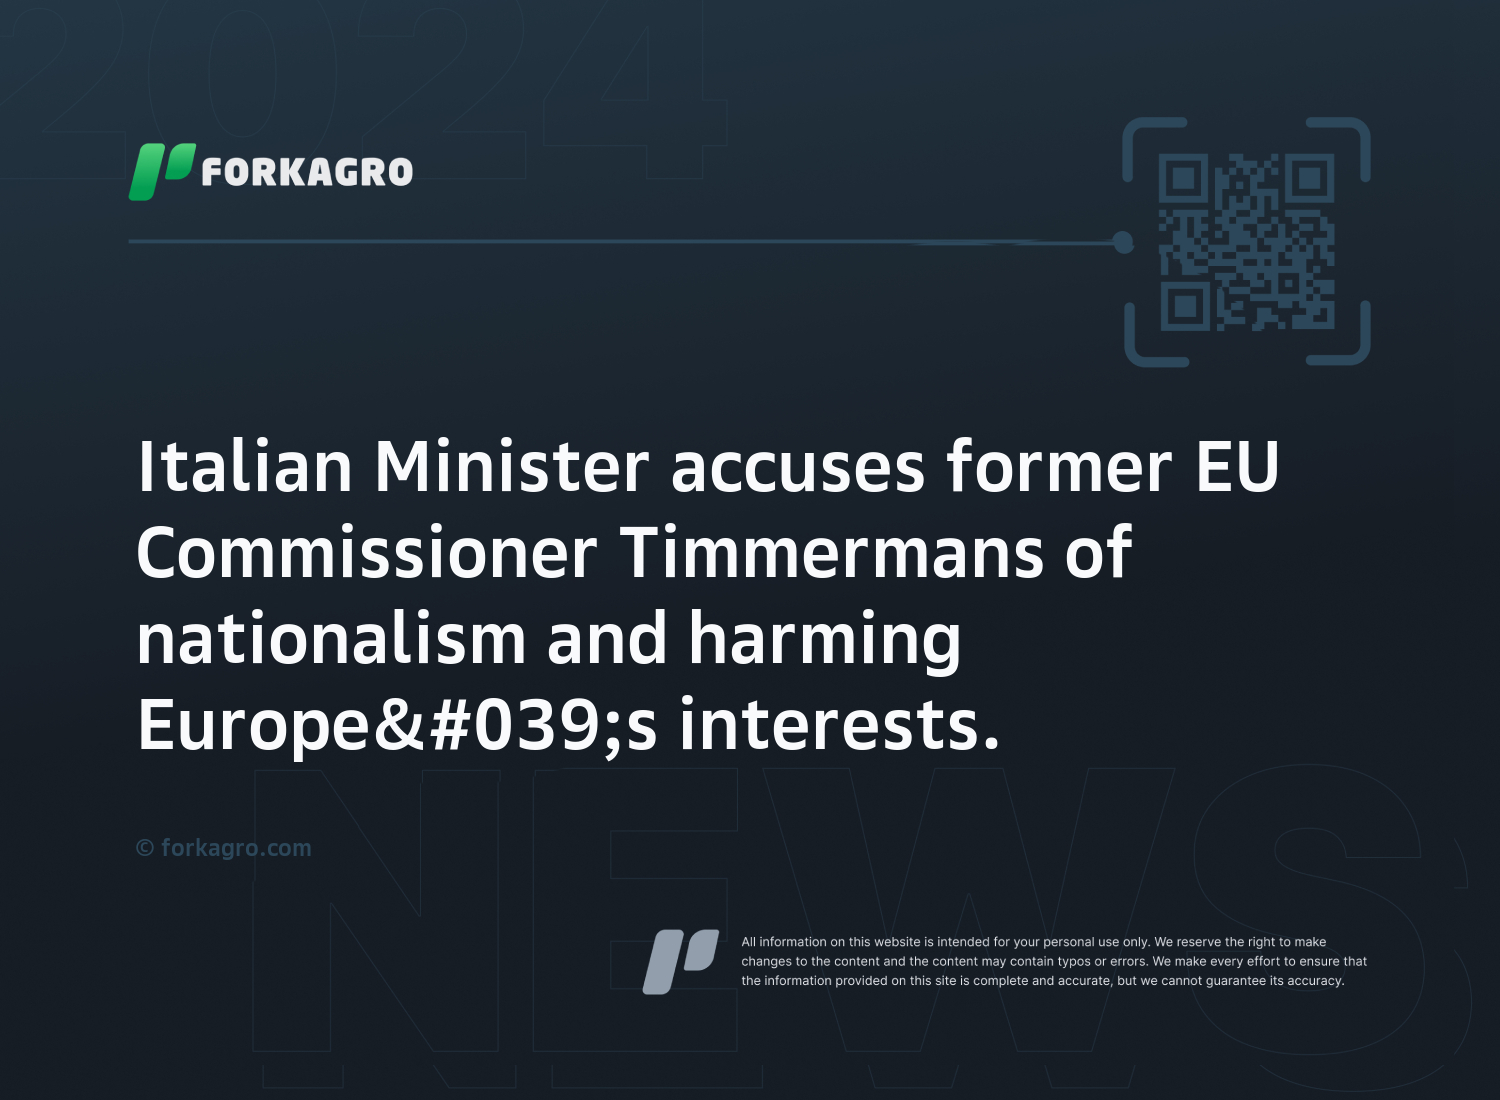 Italian Minister accuses former EU Commissioner Timmermans of nationalism and harming Europe's interests.